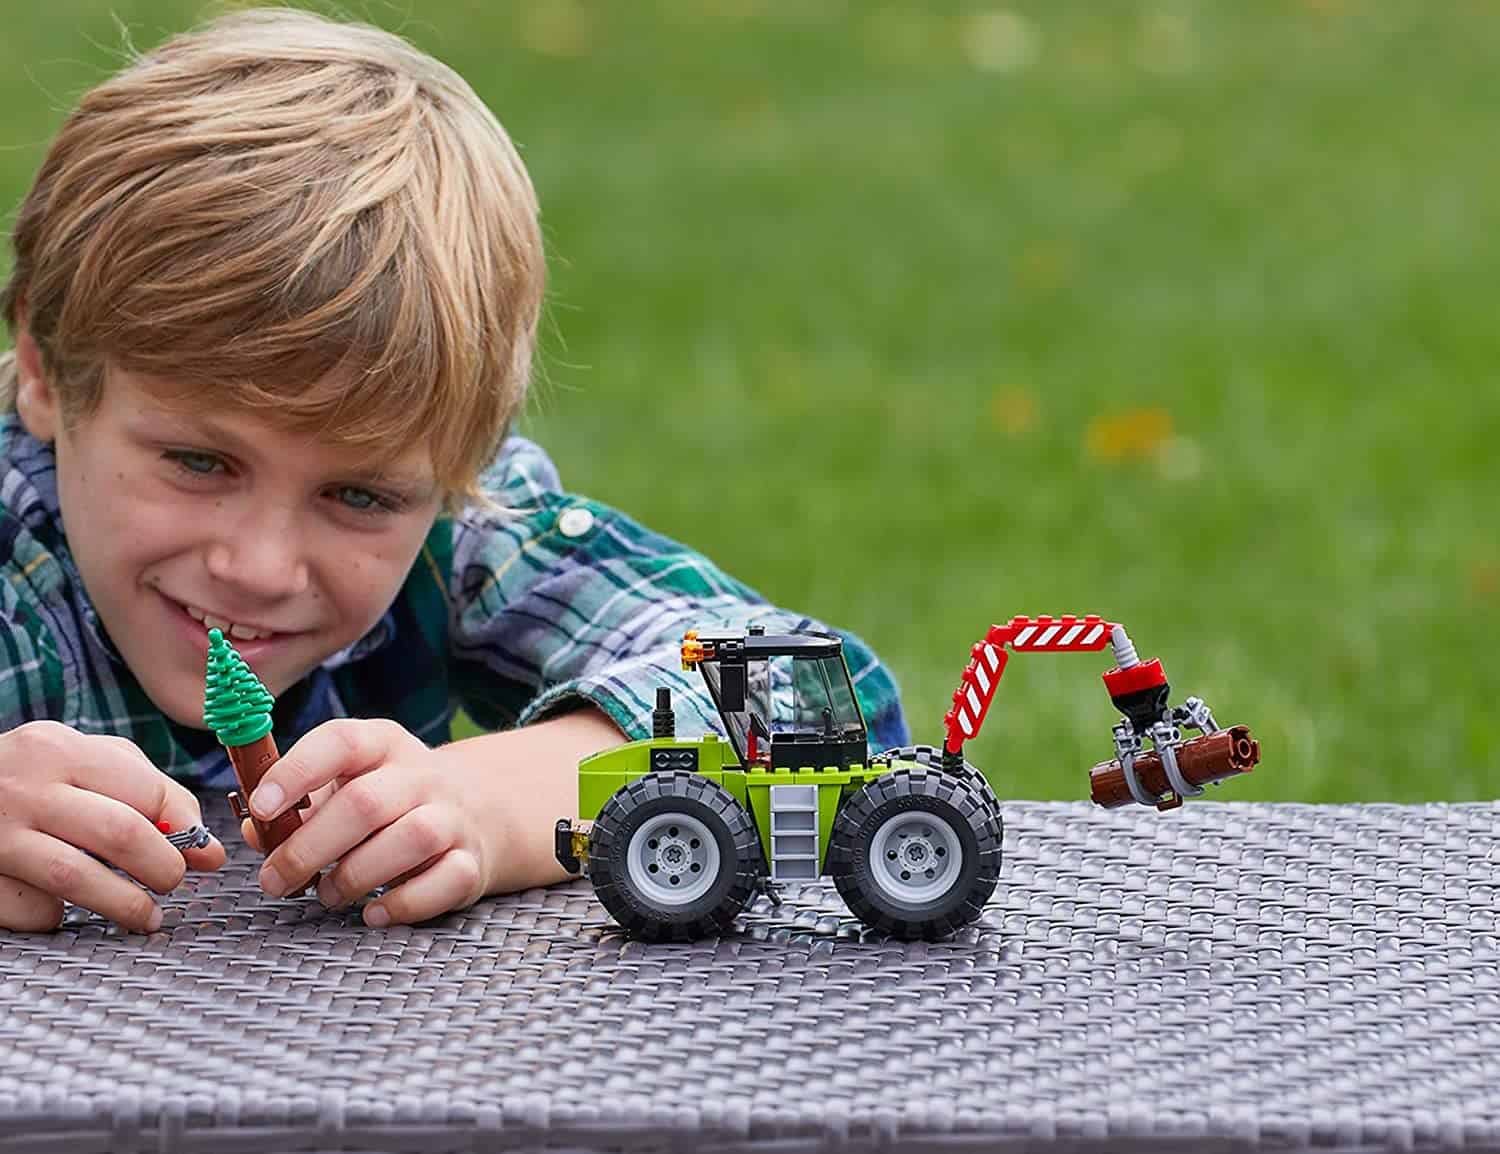 Mejor tractor Lego: LEGO City Forest Tractor 60181